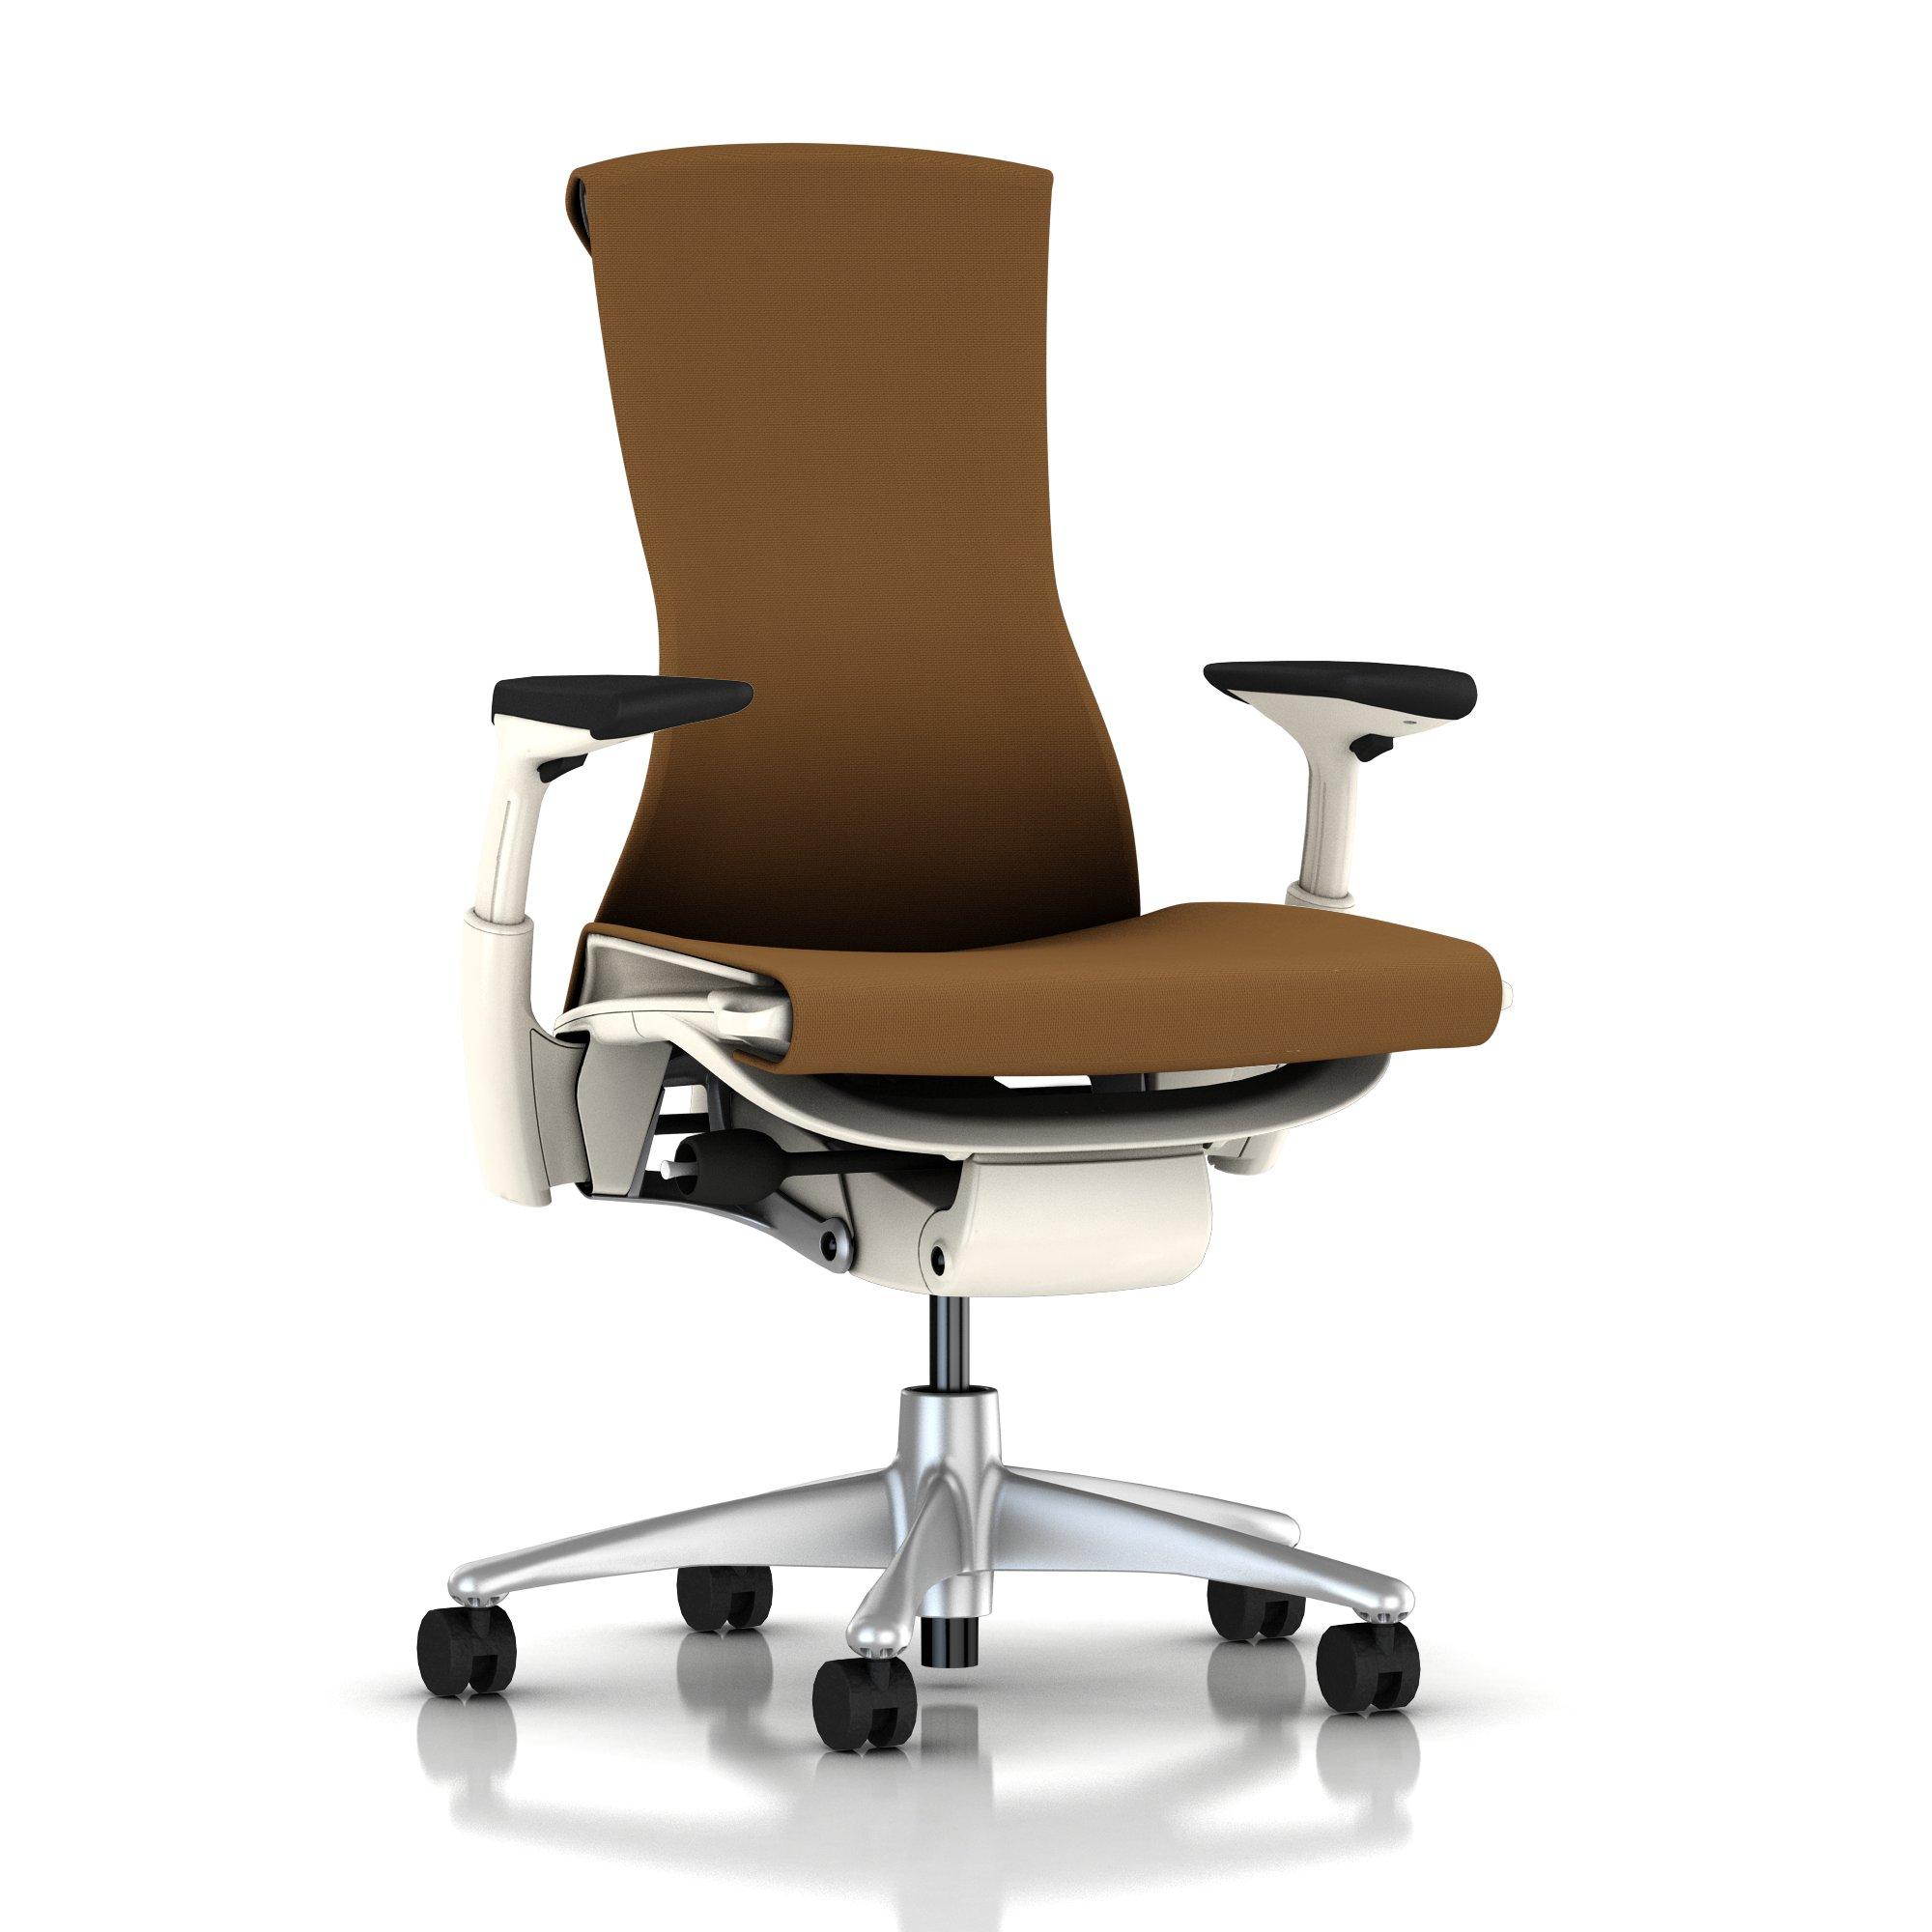 Embody Chair Molasses Rhythm with White Frame and Titanium Base by Herman Miller